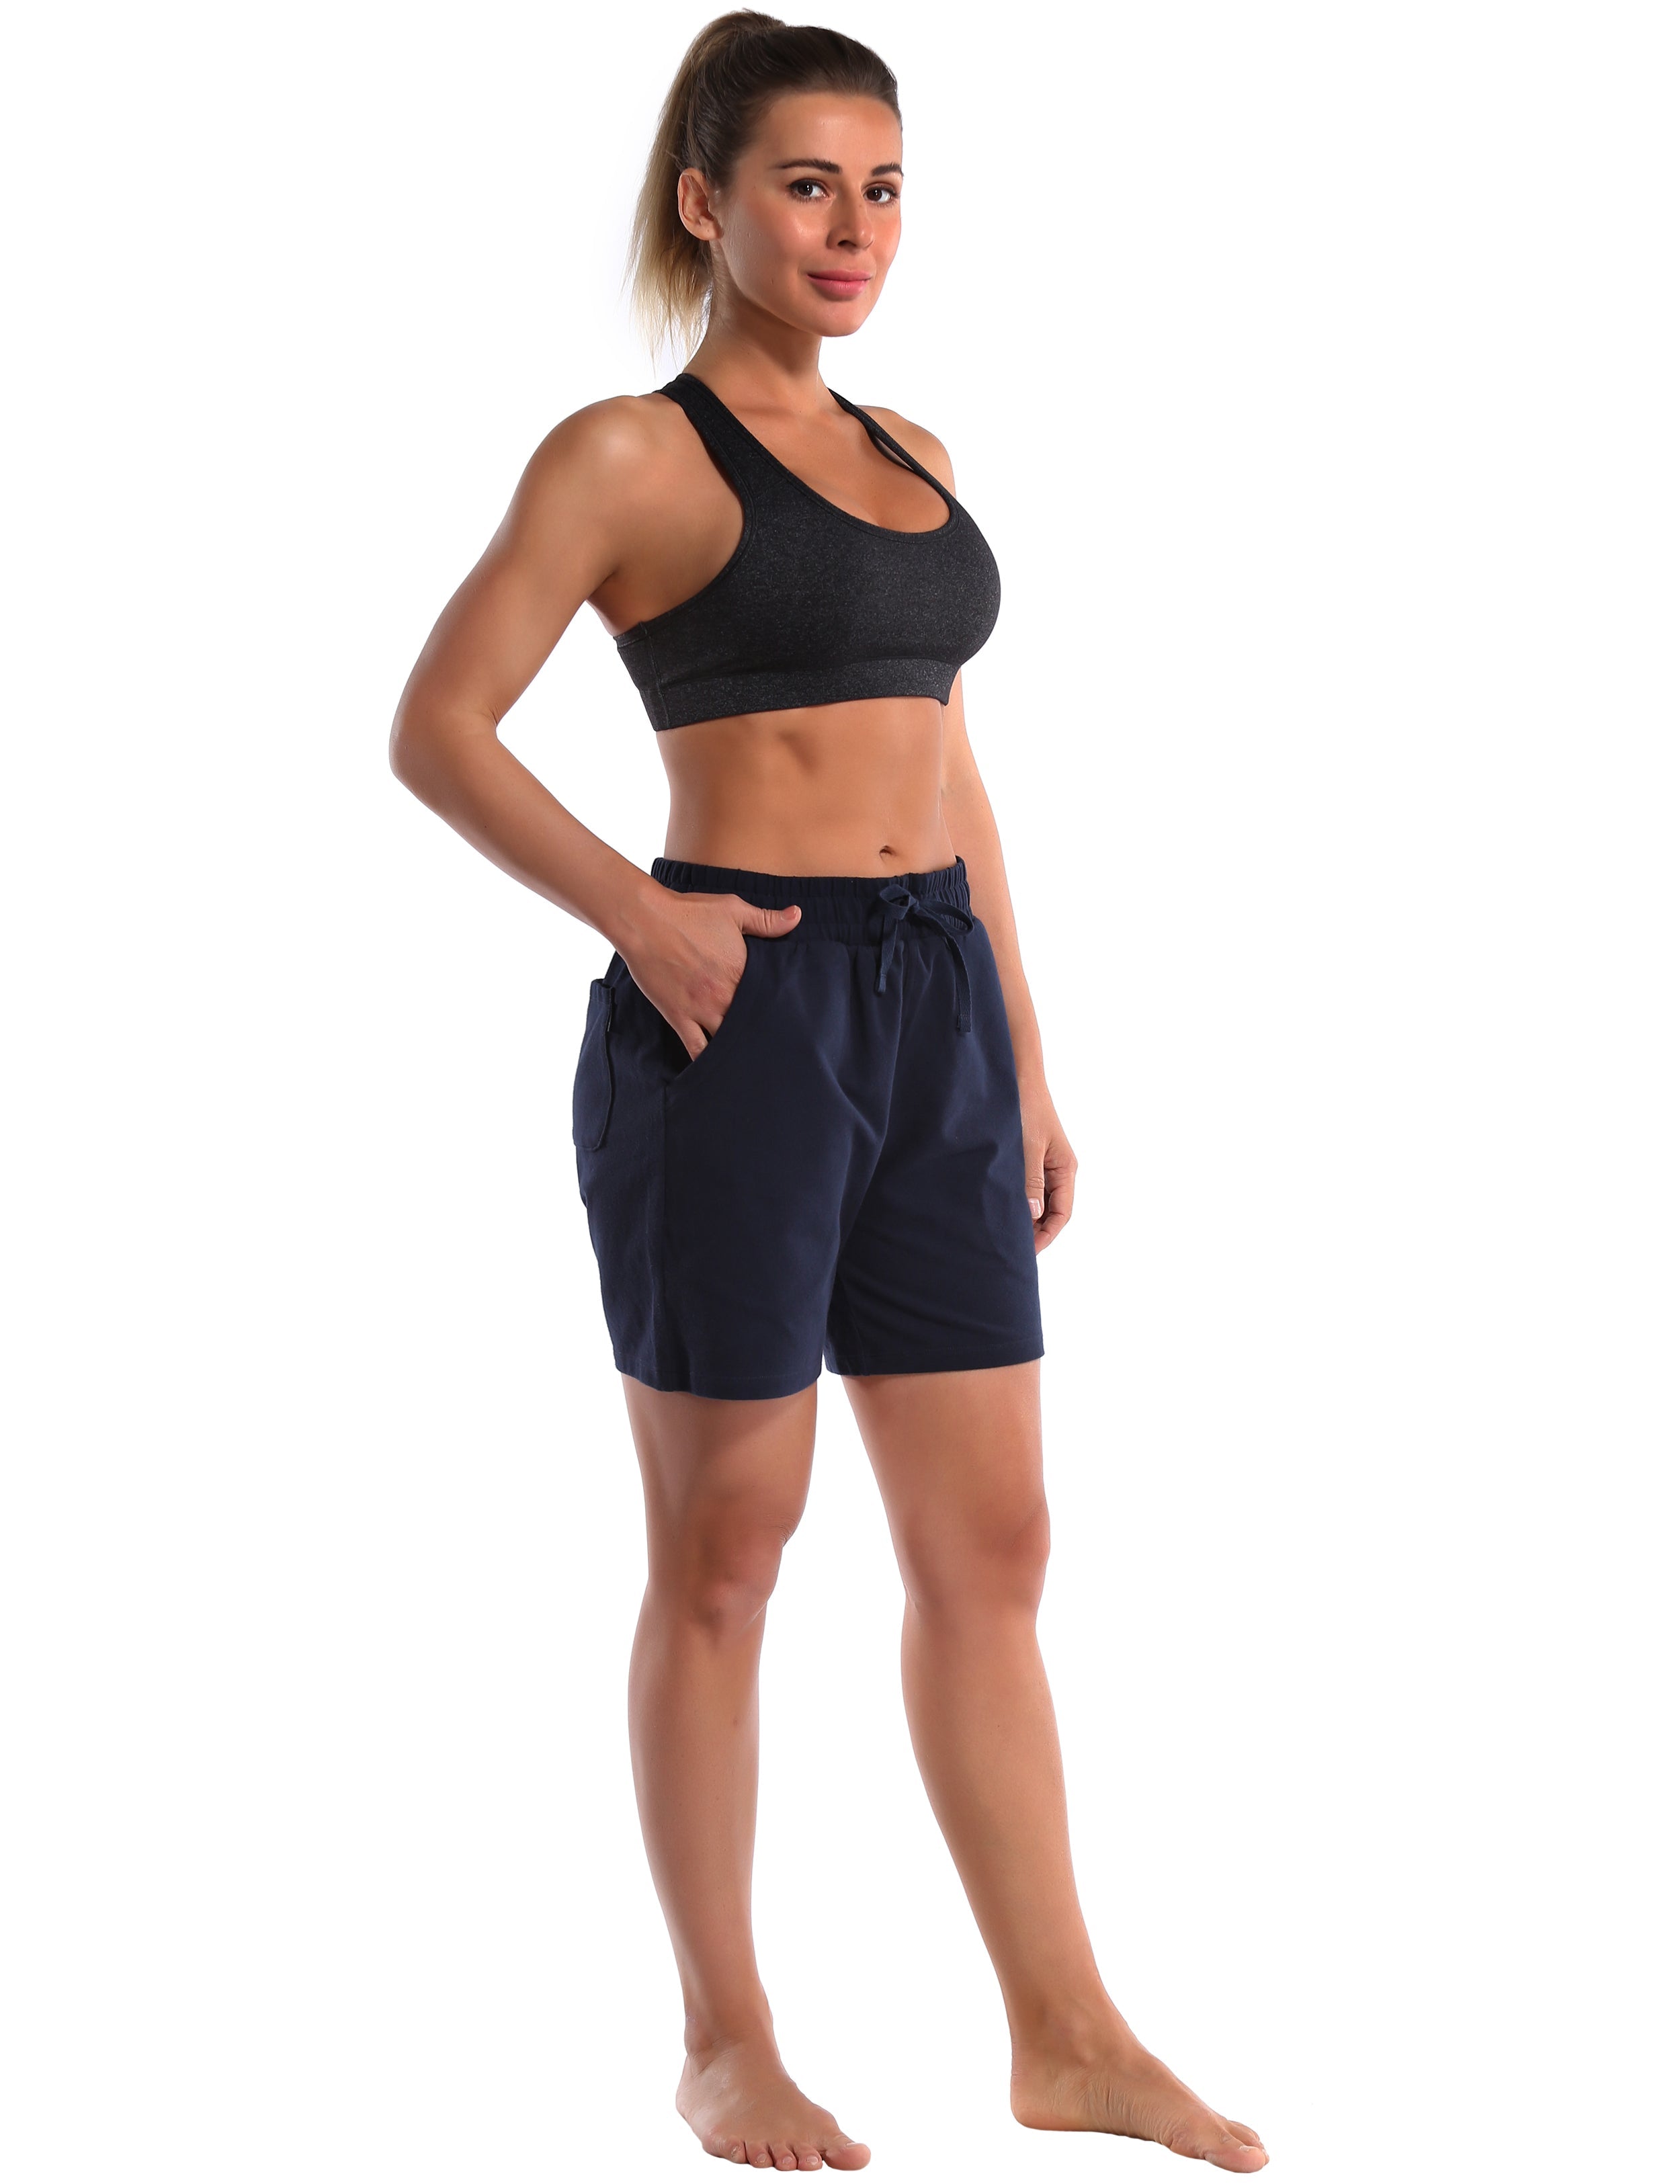 5" Joggers Shorts darknavy 90% Cotton, 10% Spandex Soft and Elastic Drawstring closure Lightweight & breathable fabric wicks away sweat to keep you comfortable Elastic waistband with internal drawcord for a snug, adjustable fit Big side pockets are available for 4.7", 5", 5.5" mobile phone Reflective logo helps you stand out in low light Perfect for any types of outdoor exercises and indoor fitness,like Pilates,Pilates,walking,jogging,lounging,workout,gym fitness,casual use,etc